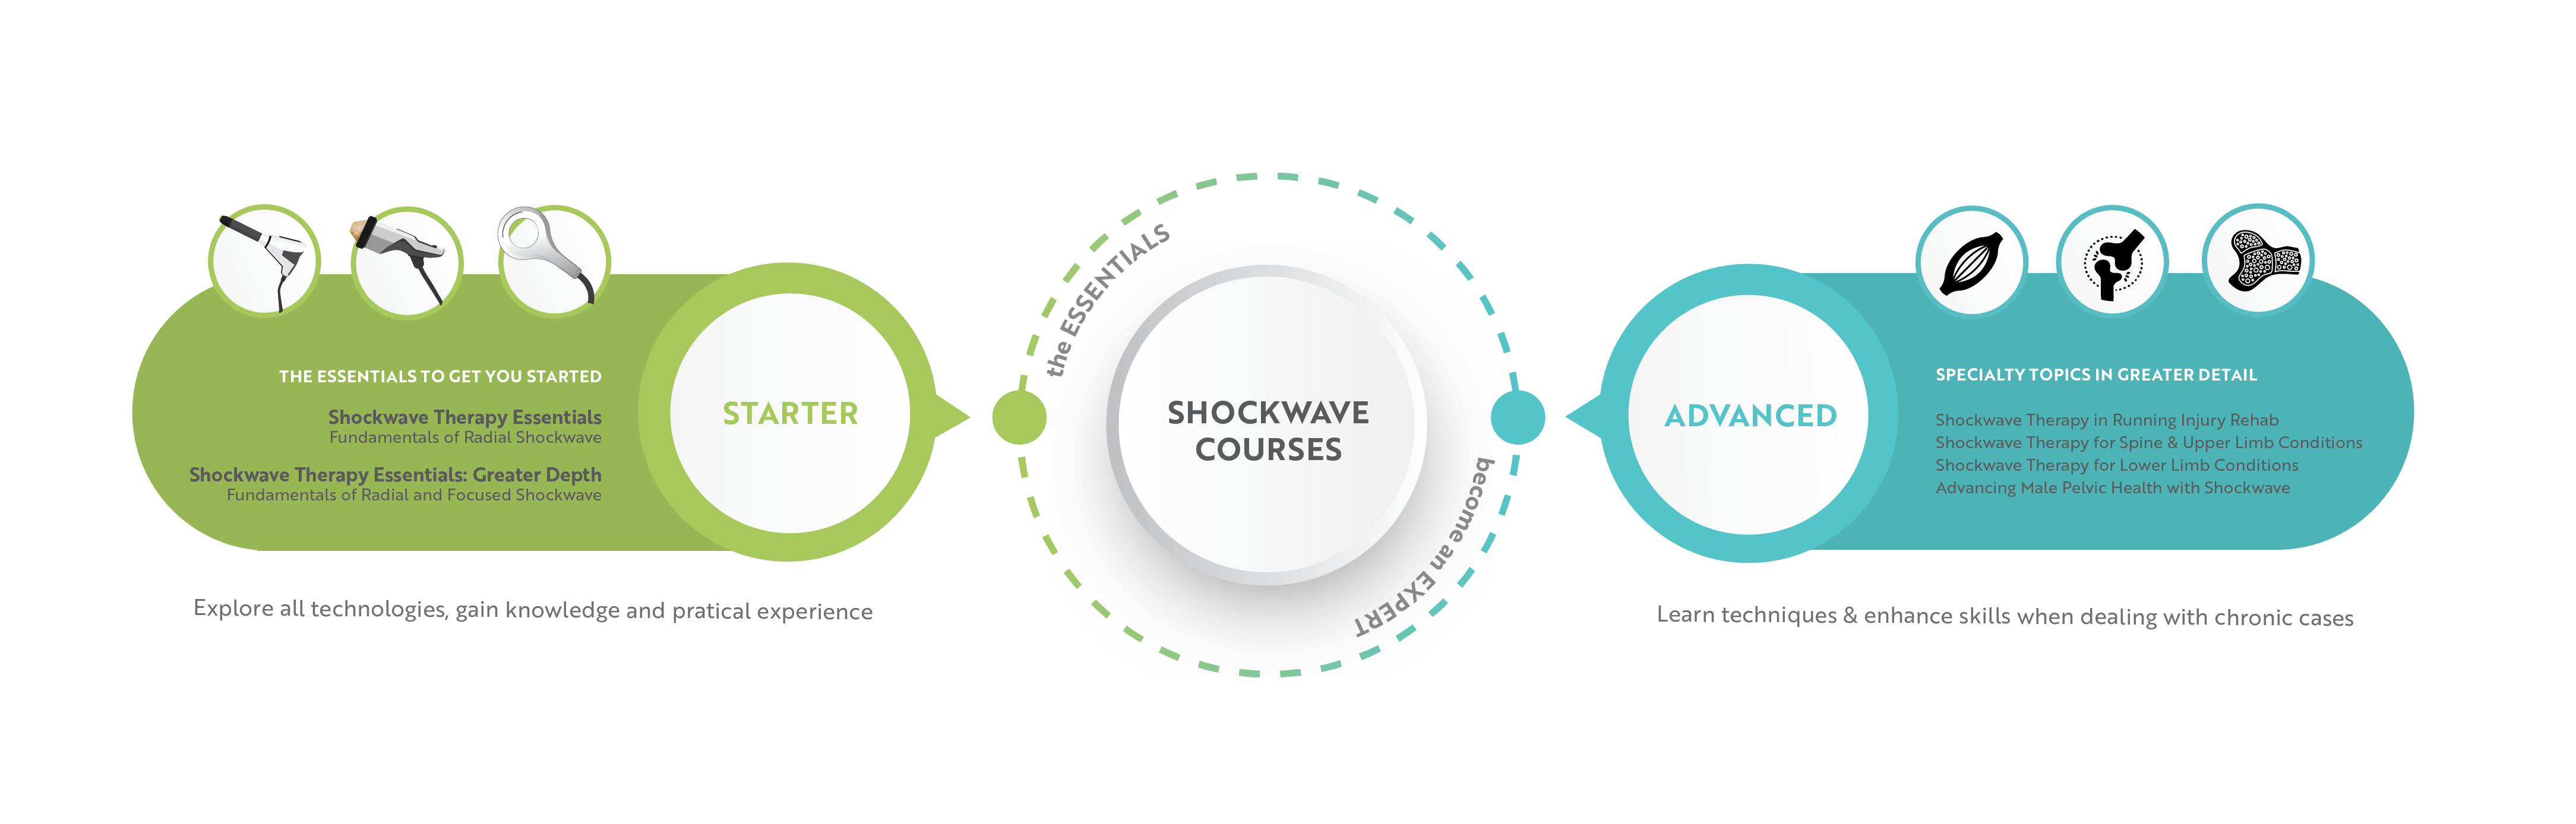 shockwave therapy course structure